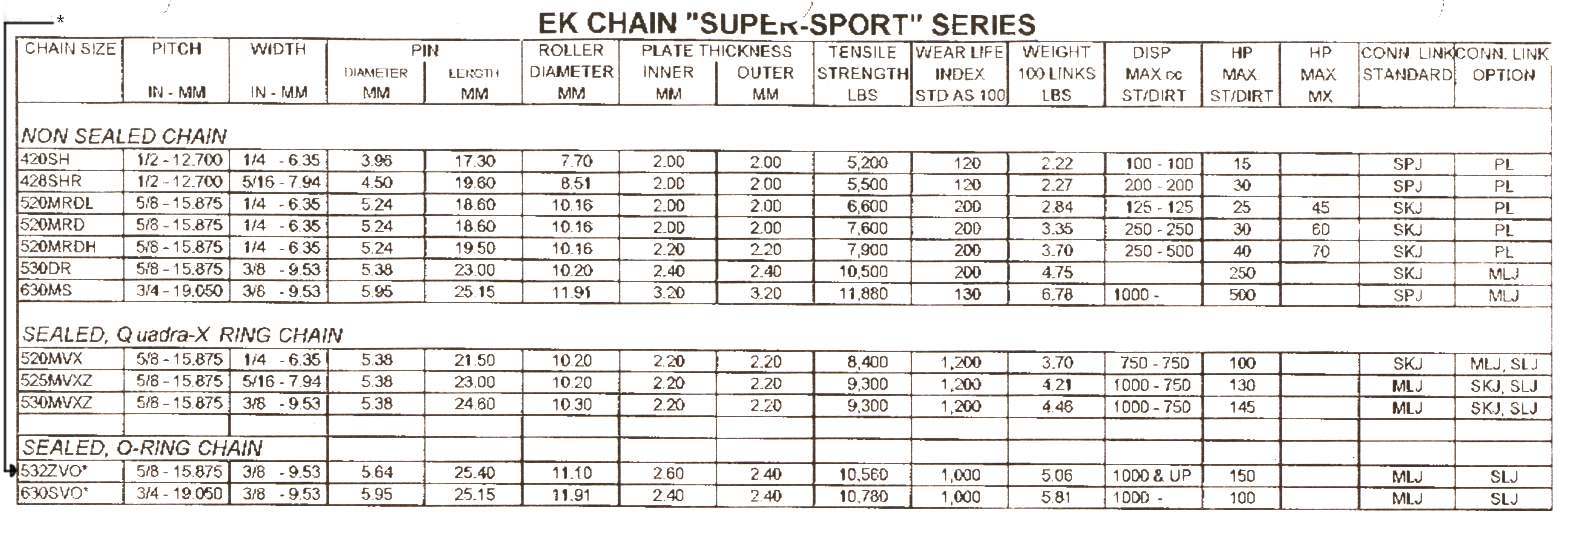 Motorcycle Chain Comparison Chart